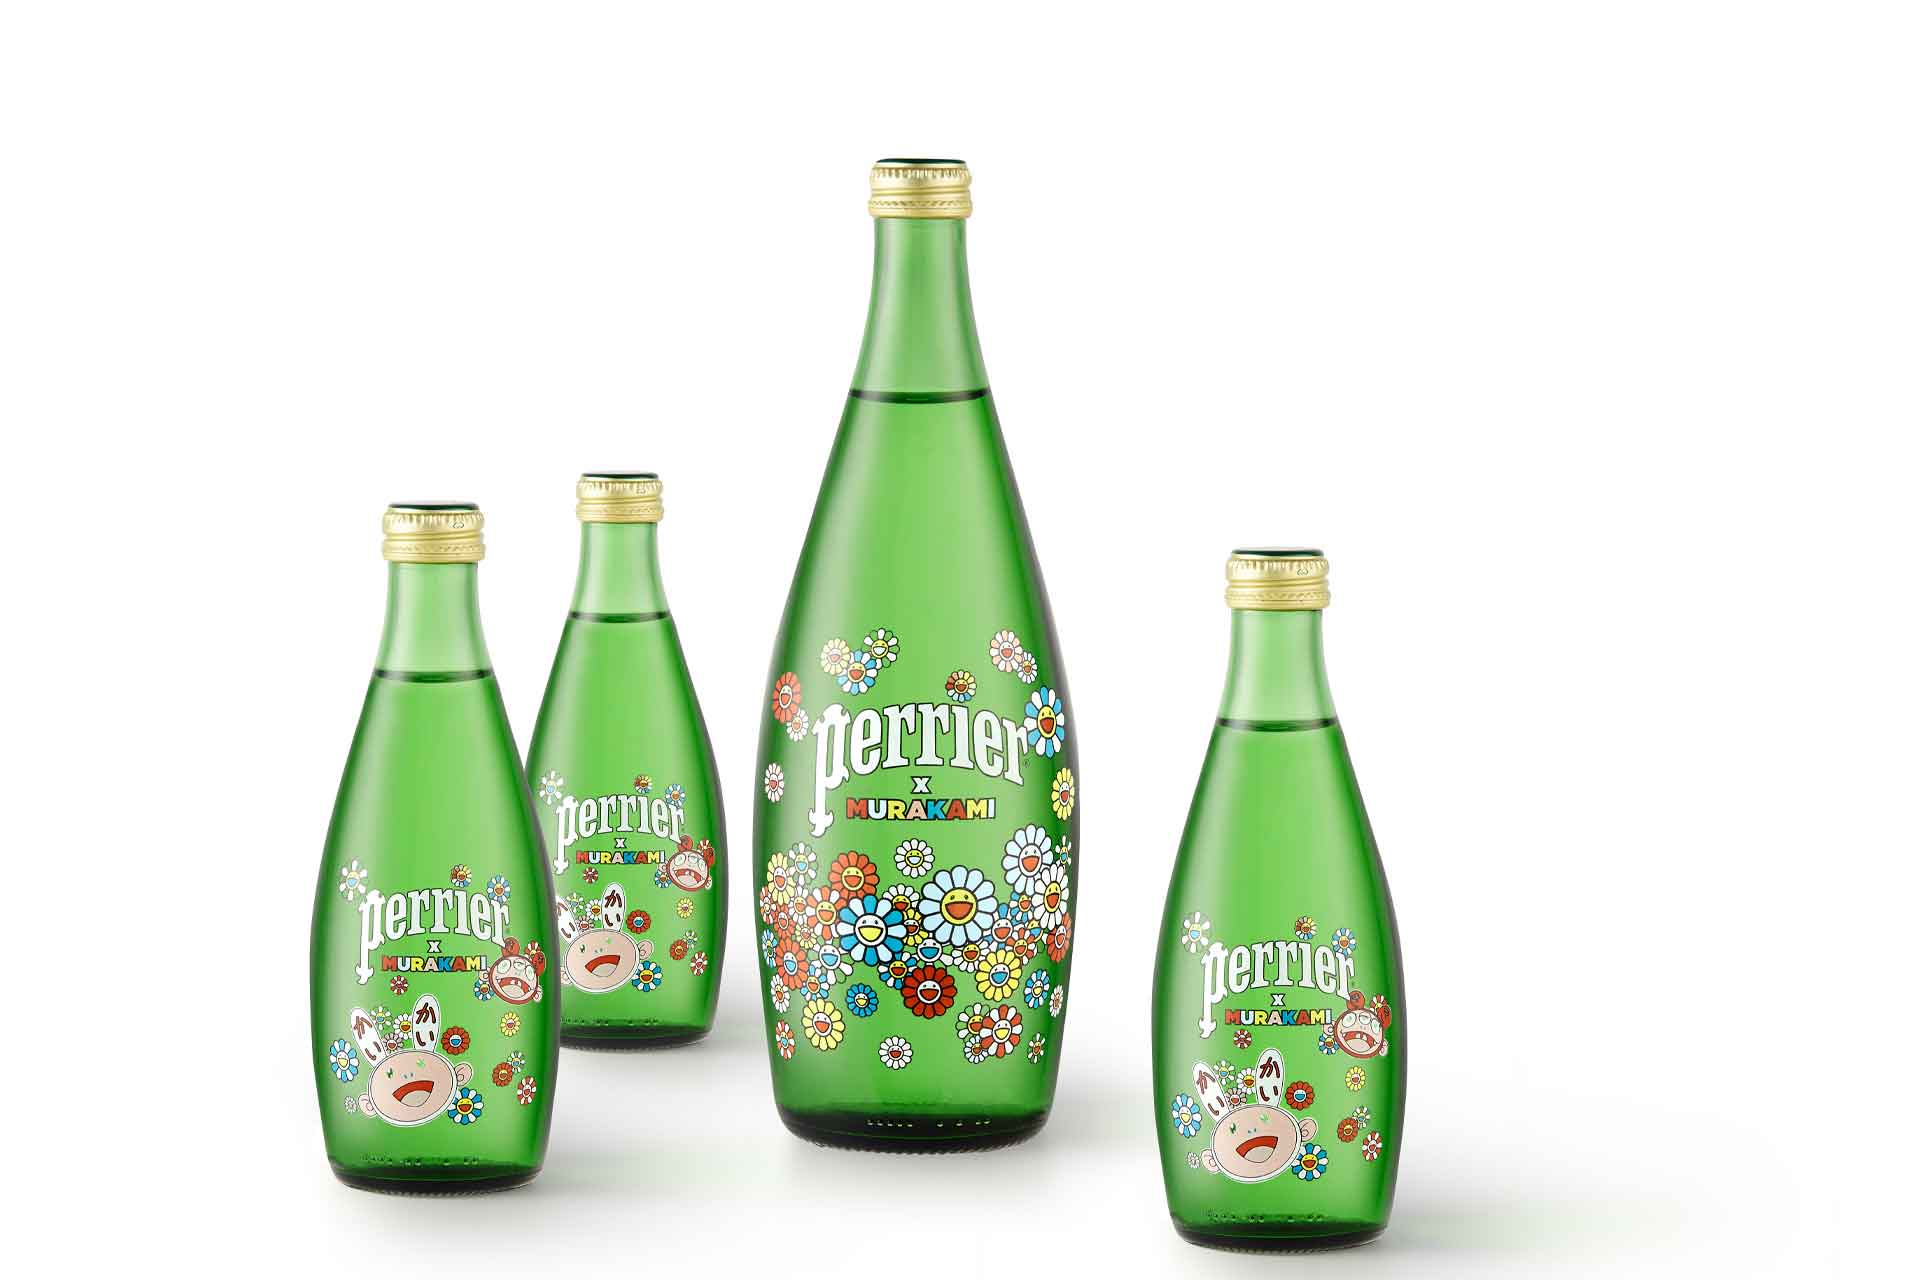 Perrier and Takashi Murakami unveil their collaboration